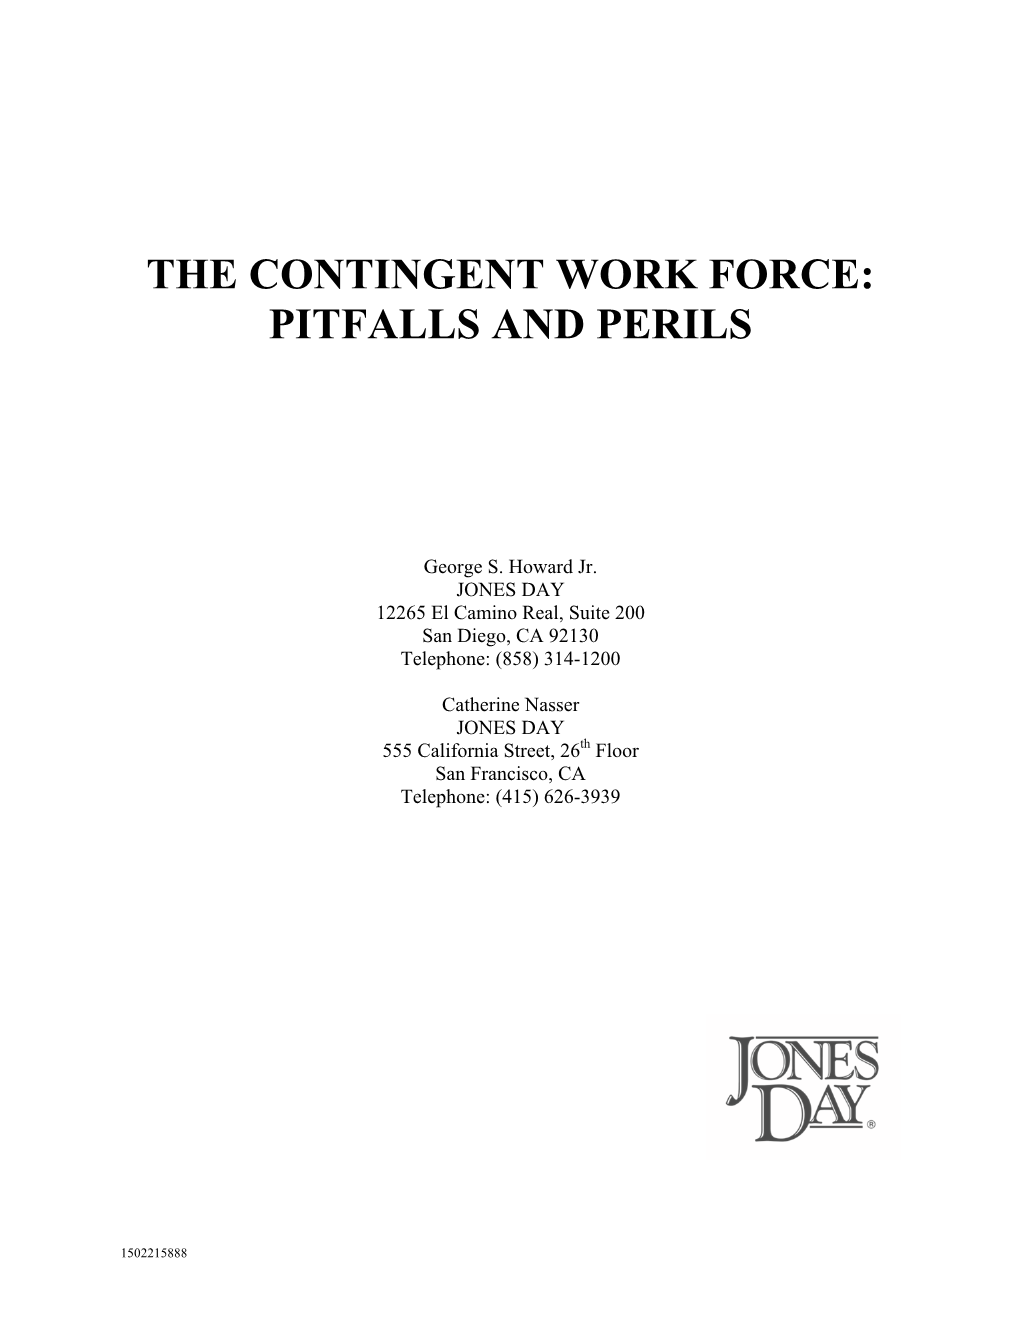 The Contingent Work Force: Pitfalls and Perils